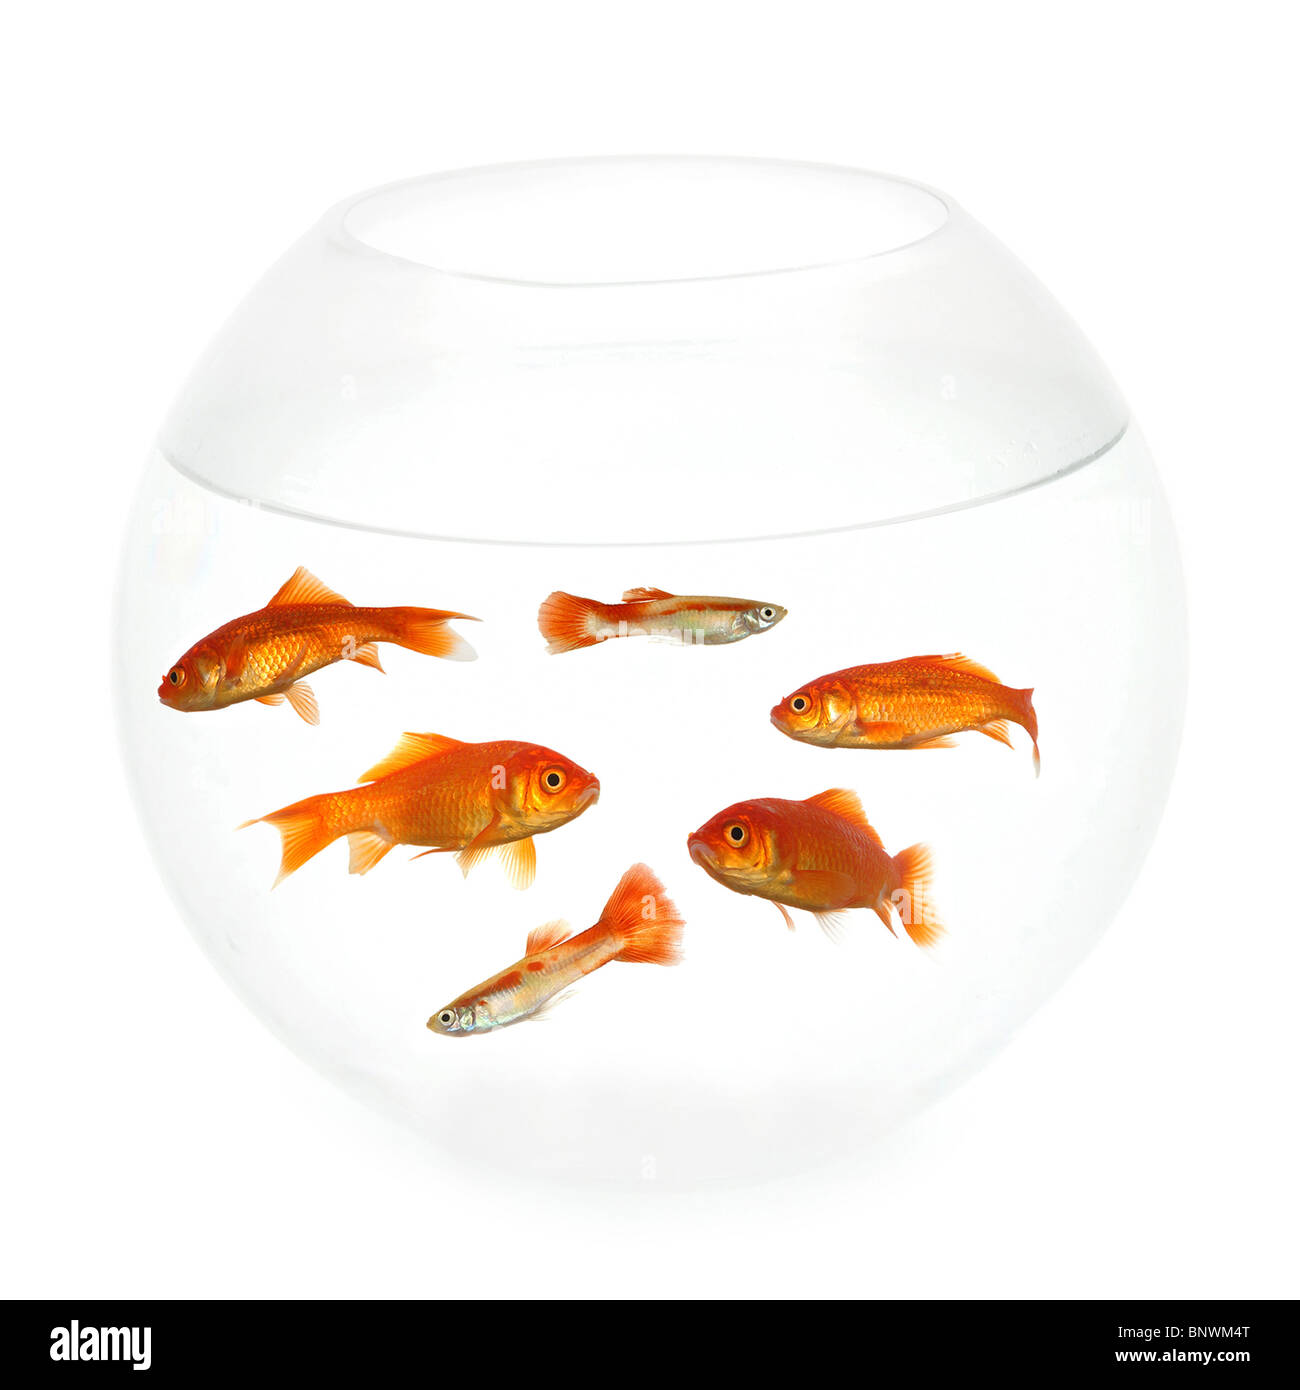 Goldfish swimming in a fishbowl. Taken on clean white background. Stock Photo